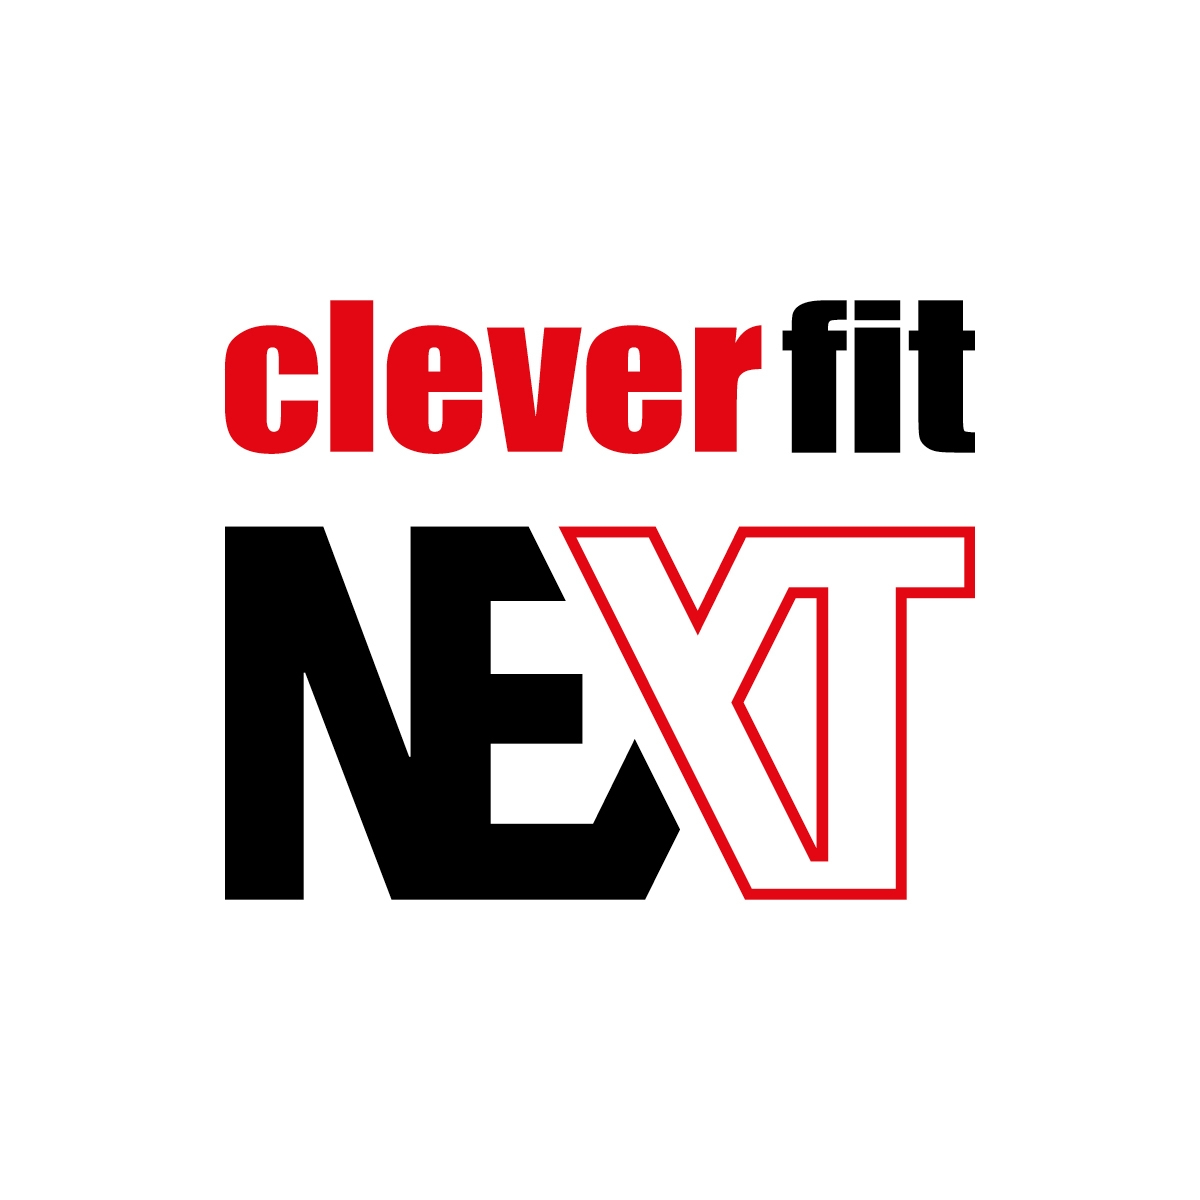 clever fit NEXT Fitnessstudio | Krafttraining, Fitnesskurse, Personal Training in Straßlach-Dingharting